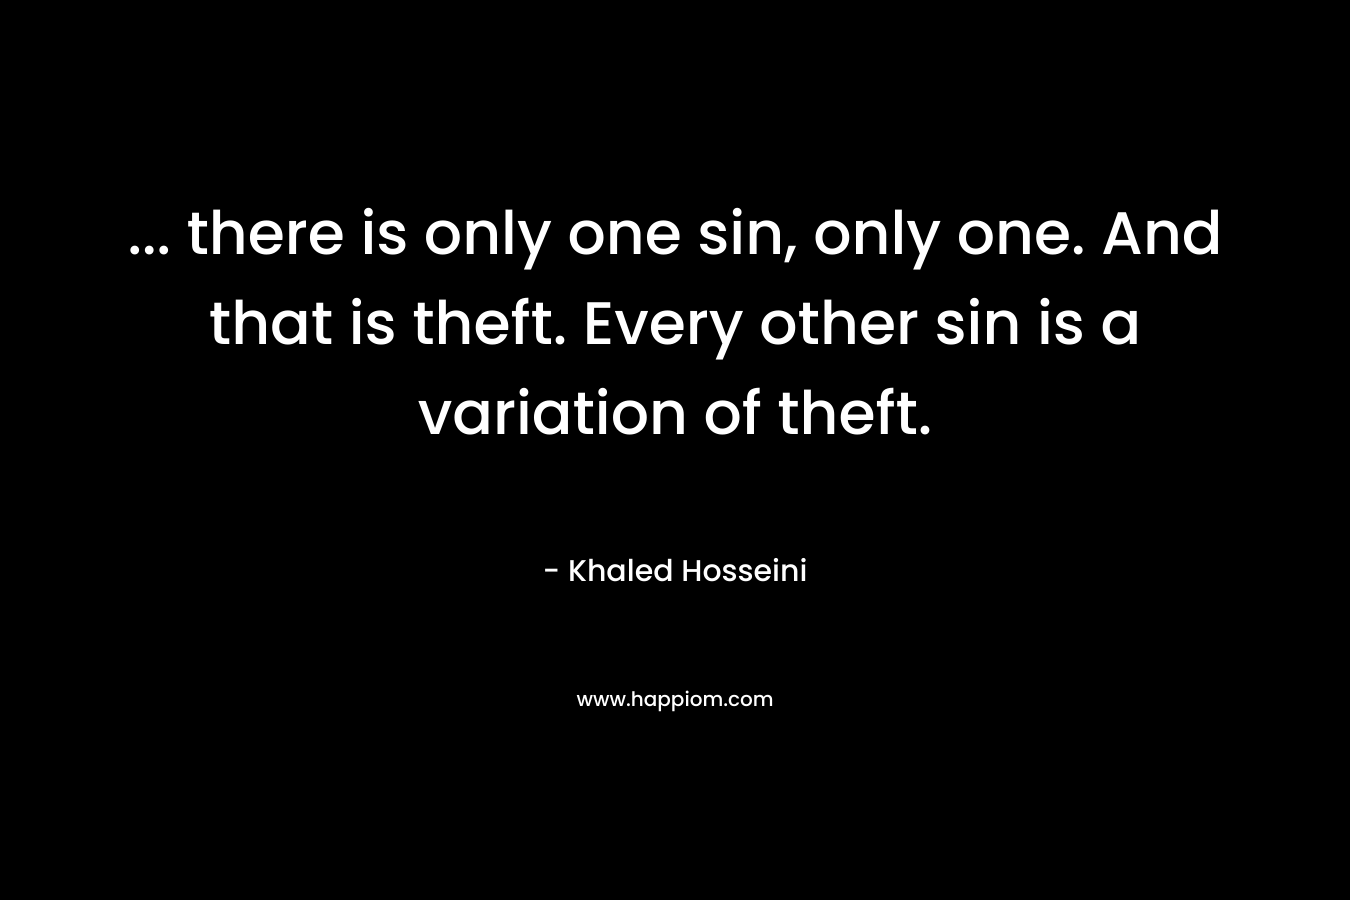 … there is only one sin, only one. And that is theft. Every other sin is a variation of theft. – Khaled Hosseini